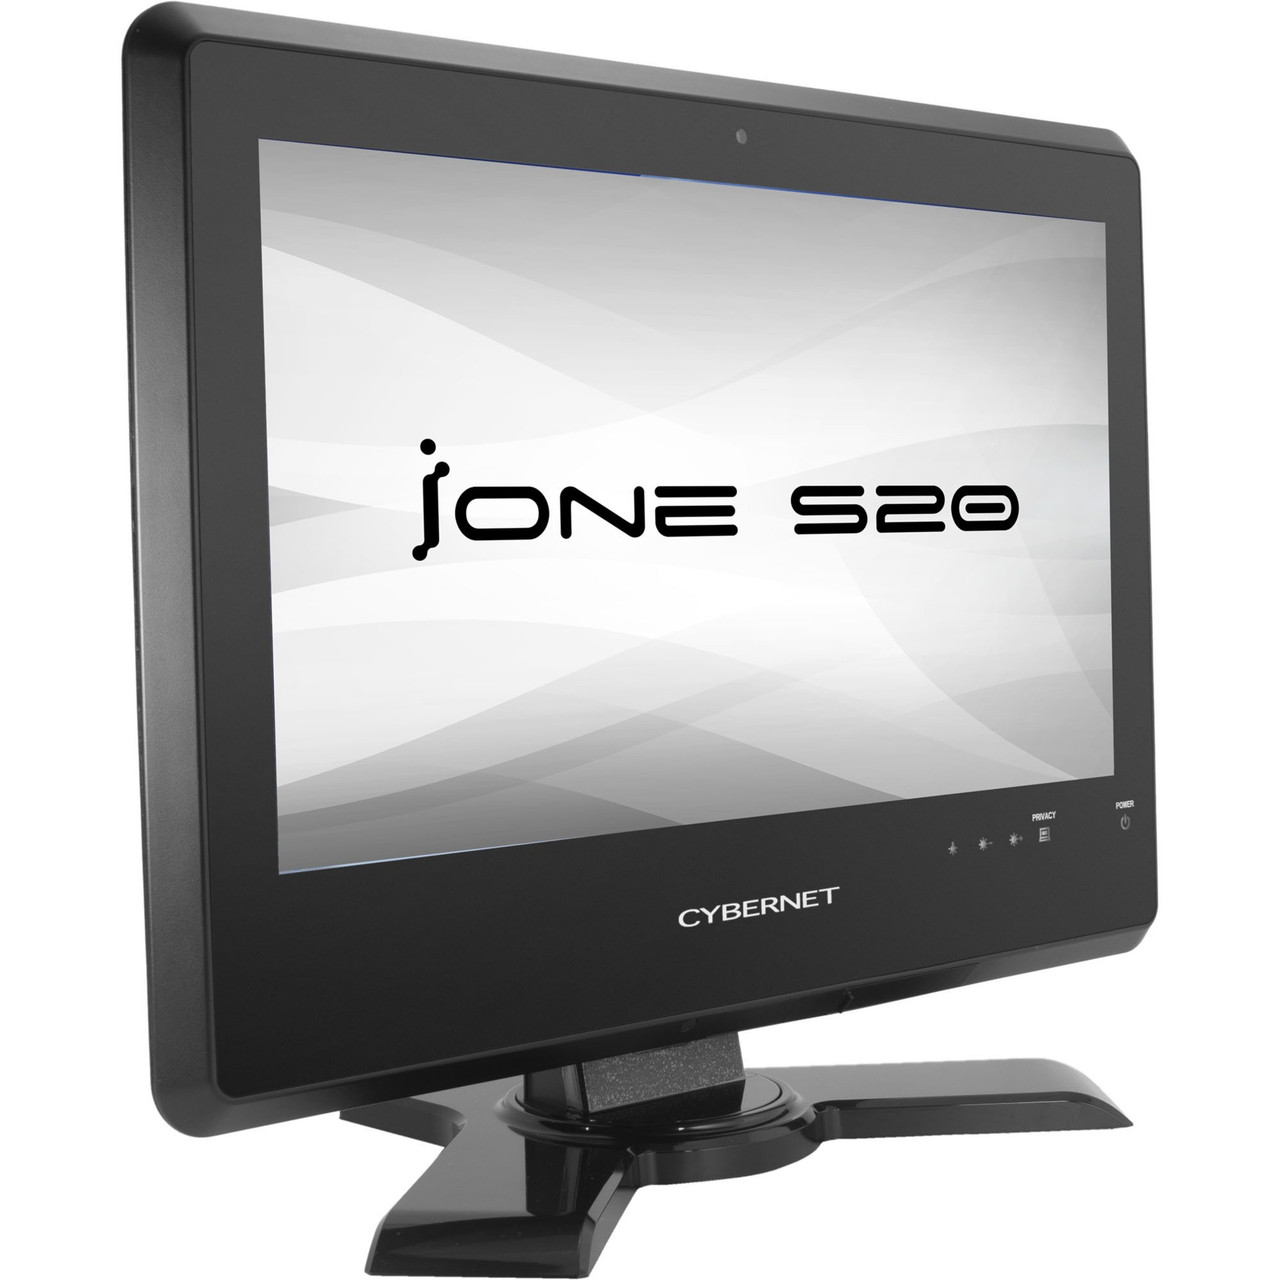 Cybernet iOne S20 All-in-One Computer - Intel Core i5 6th Gen i5-6200U 2.30 GHz - 8 GB RAM DDR4 SDRAM - 128 GB SSD - 19.5" HD+ 1600 x 900 Touchscreen Display - Desktop - Black - IONE-S20